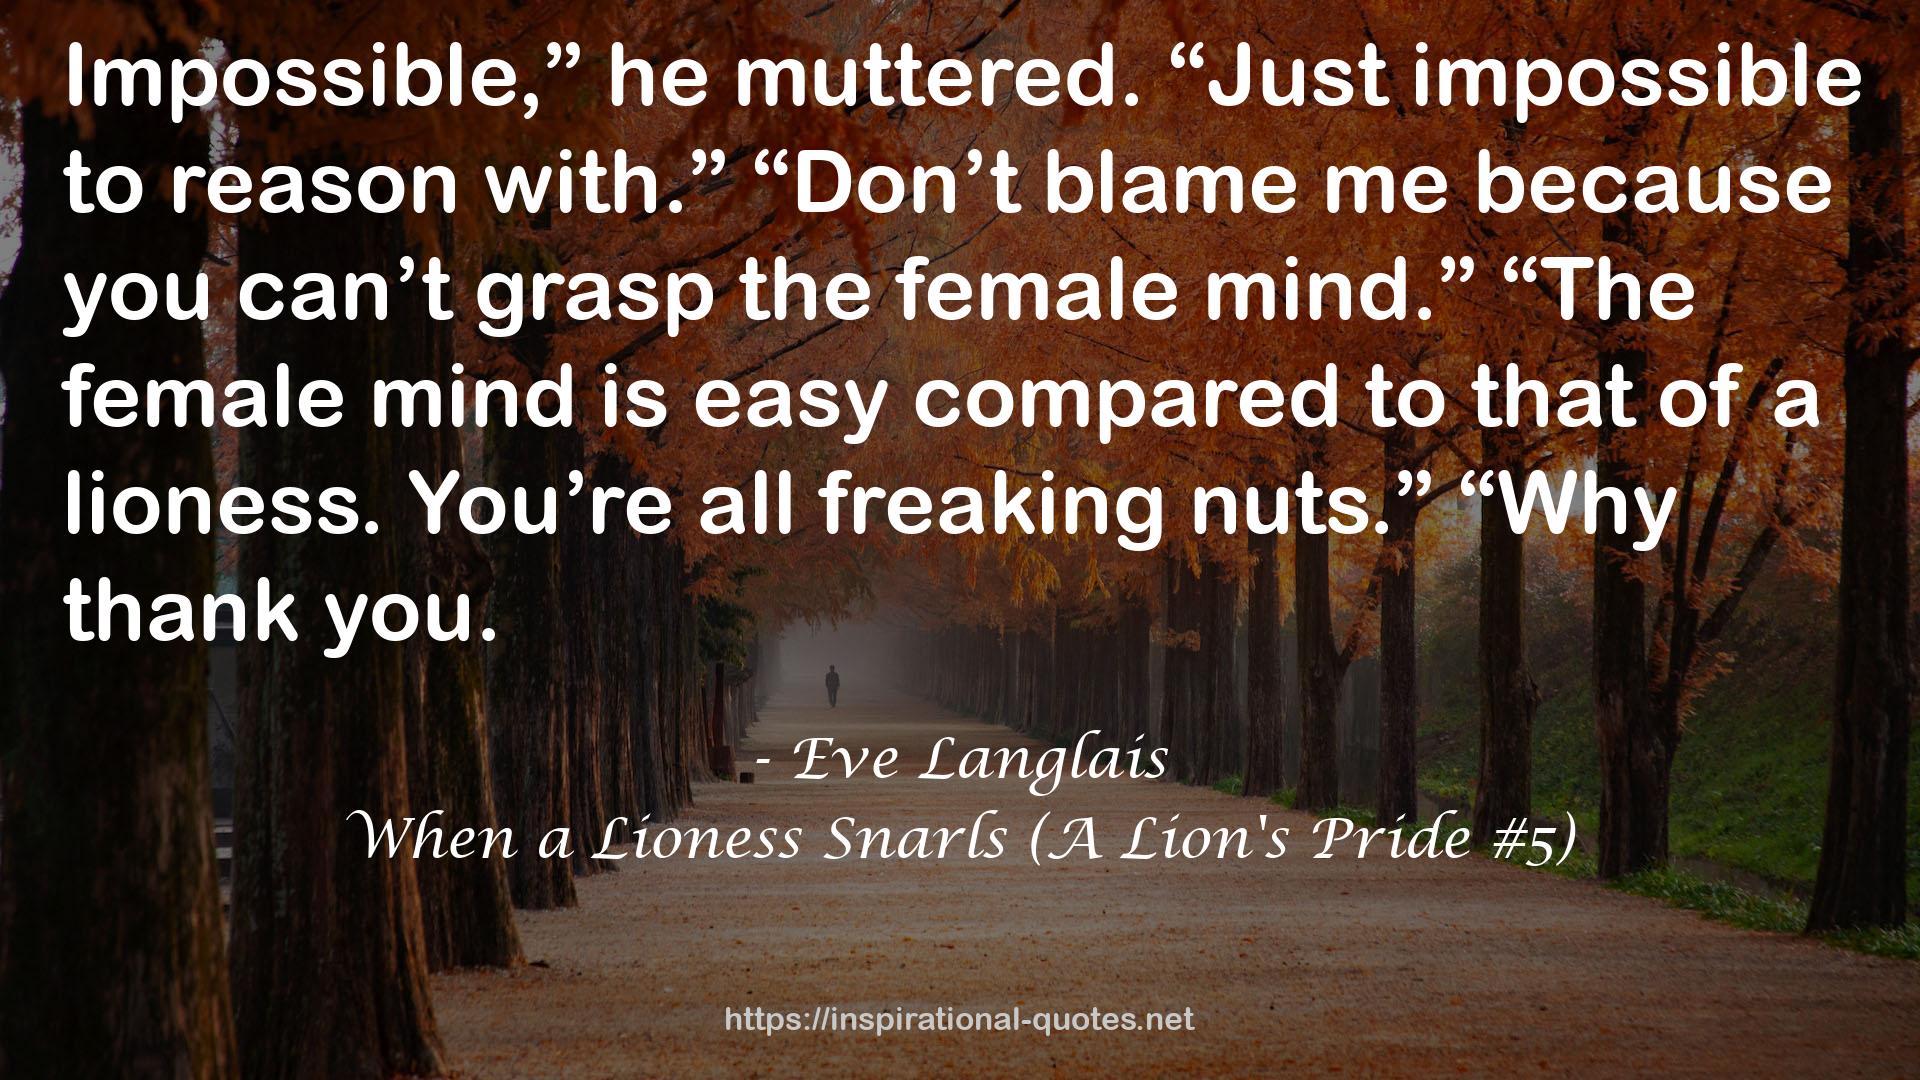 When a Lioness Snarls (A Lion's Pride #5) QUOTES